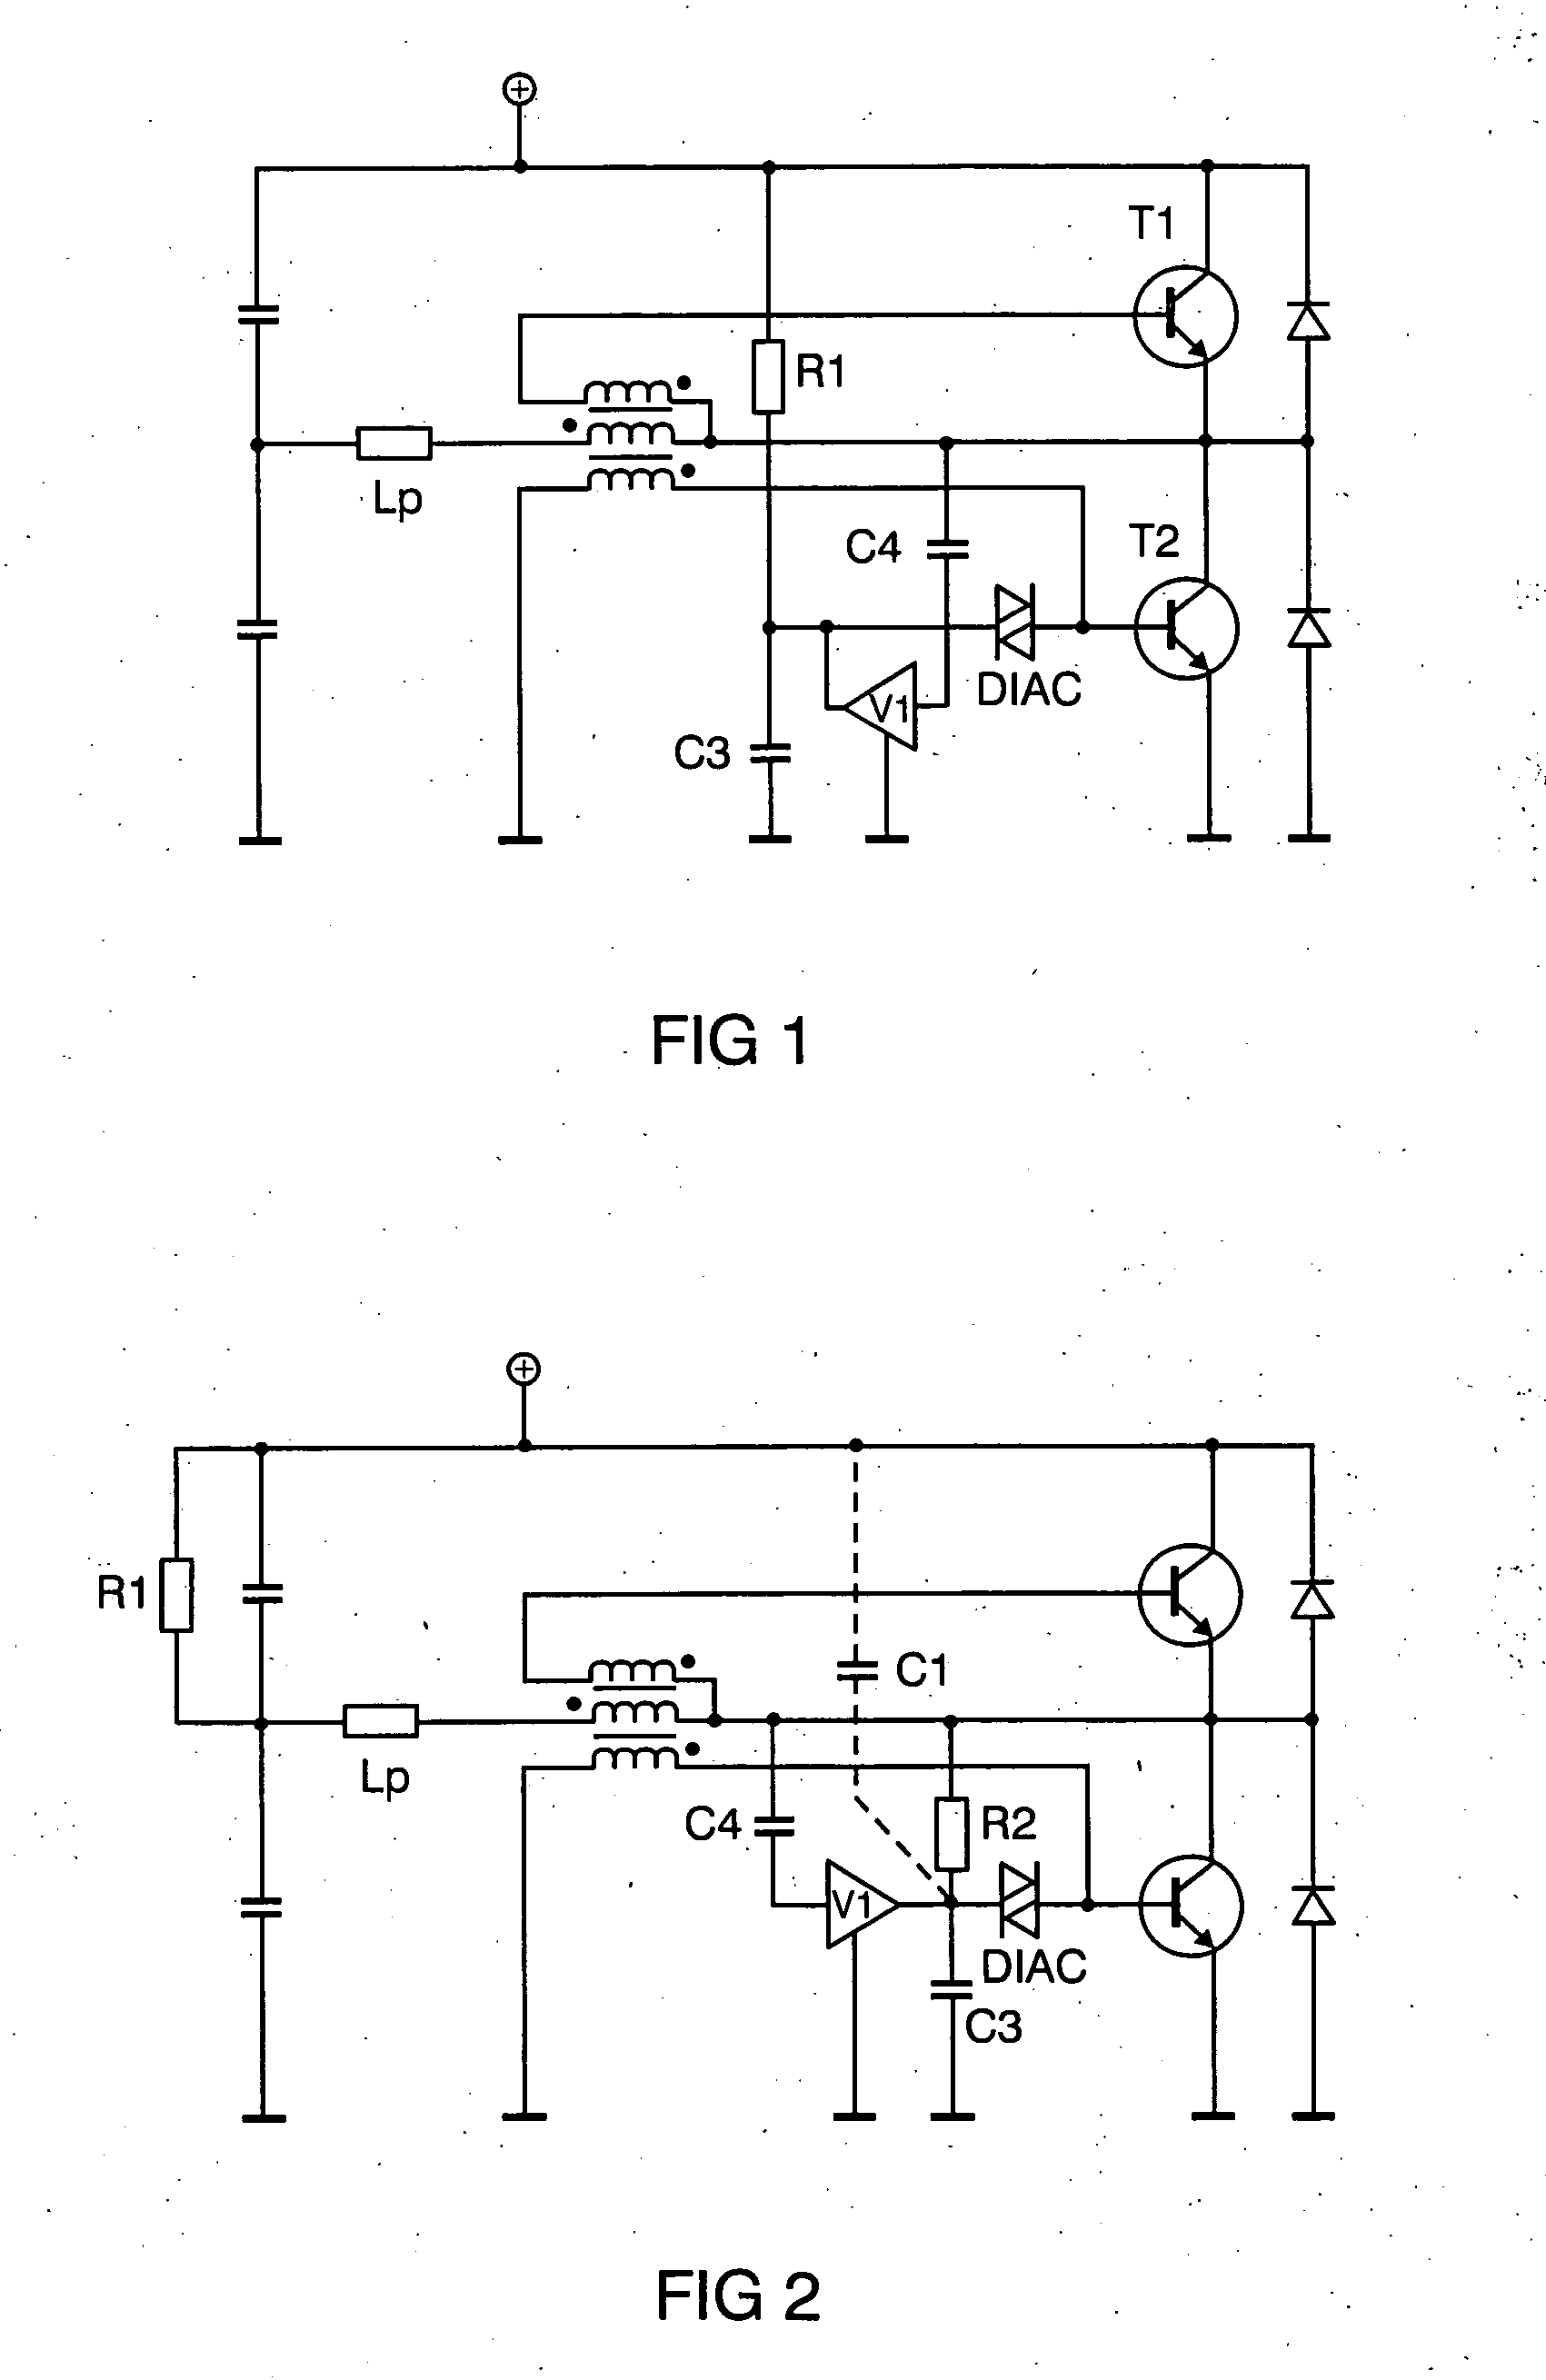 Circuit for the operation of light sources